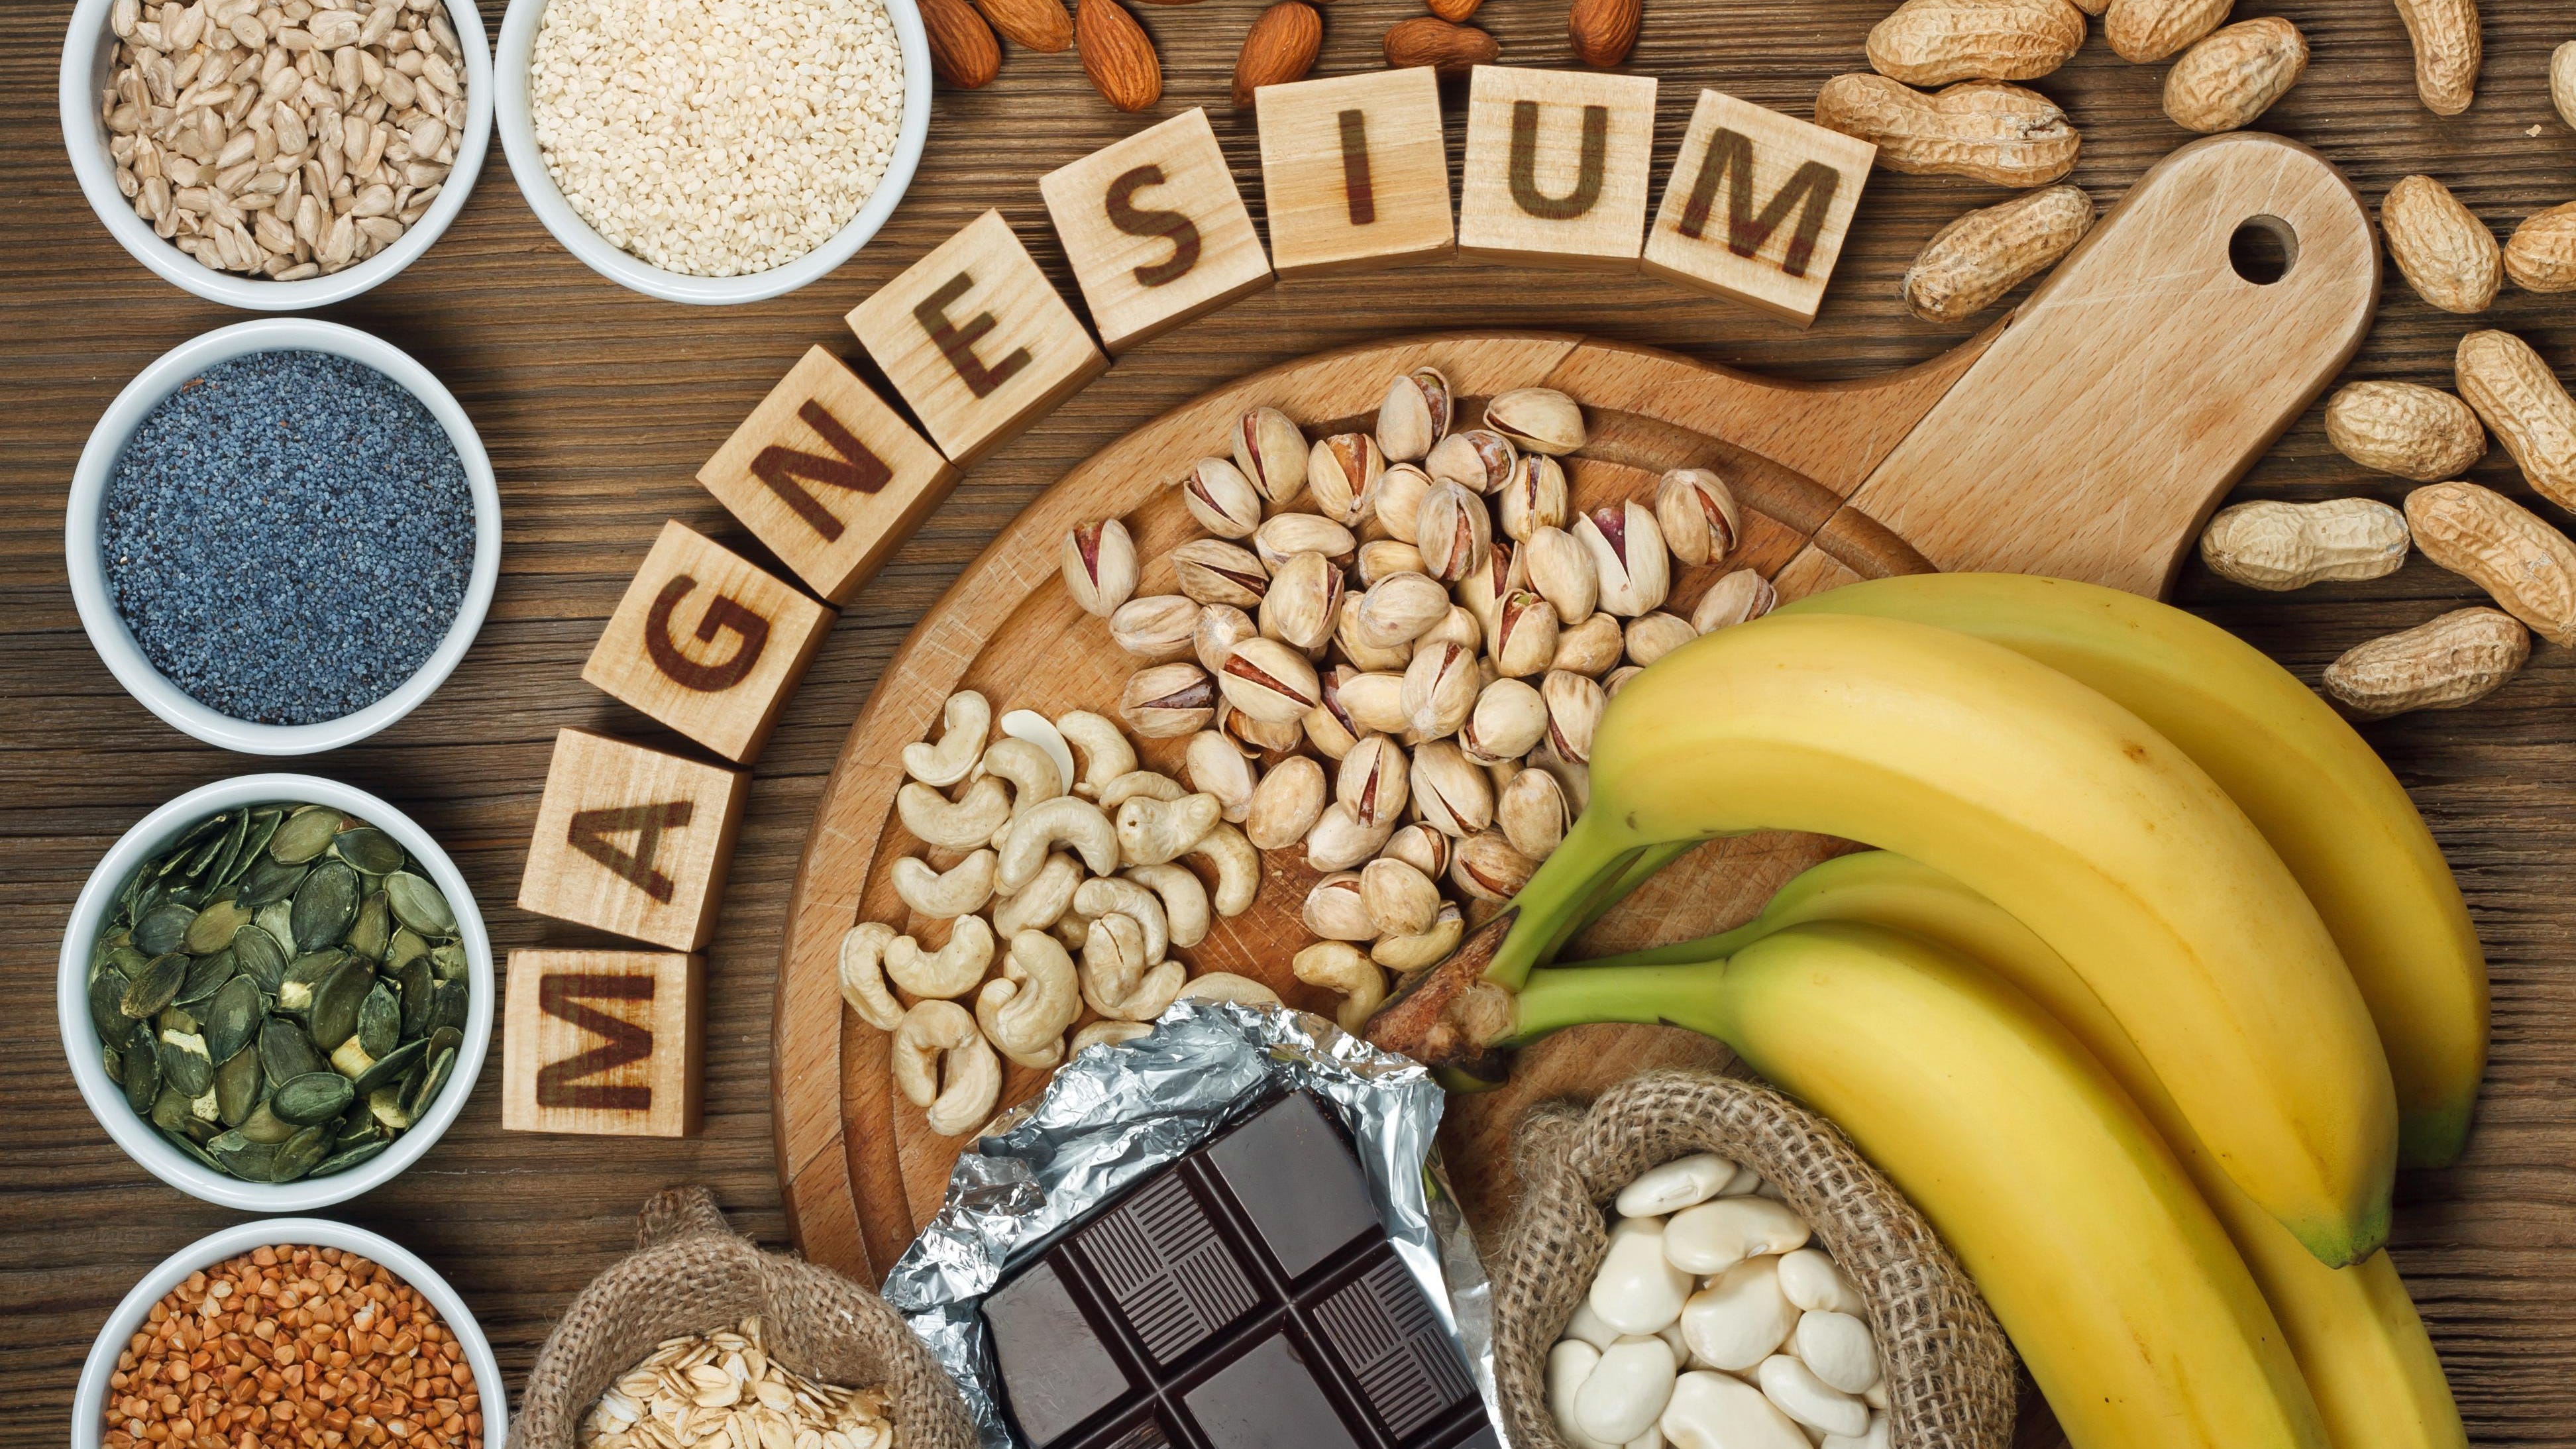 HEALTH WATCH: Why we need magnesium in our diet